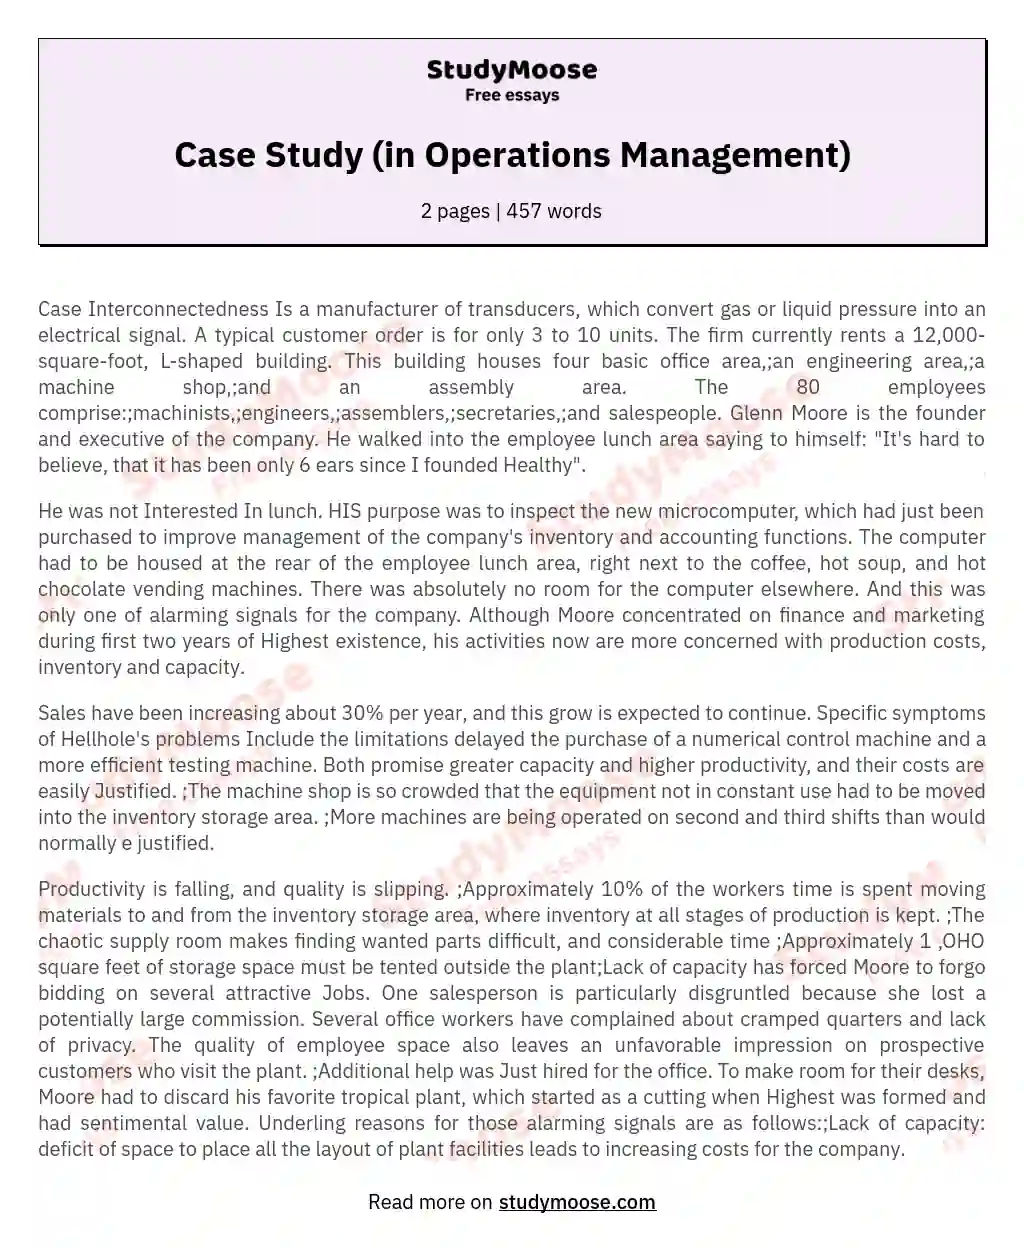 Case Study (in Operations Management) essay